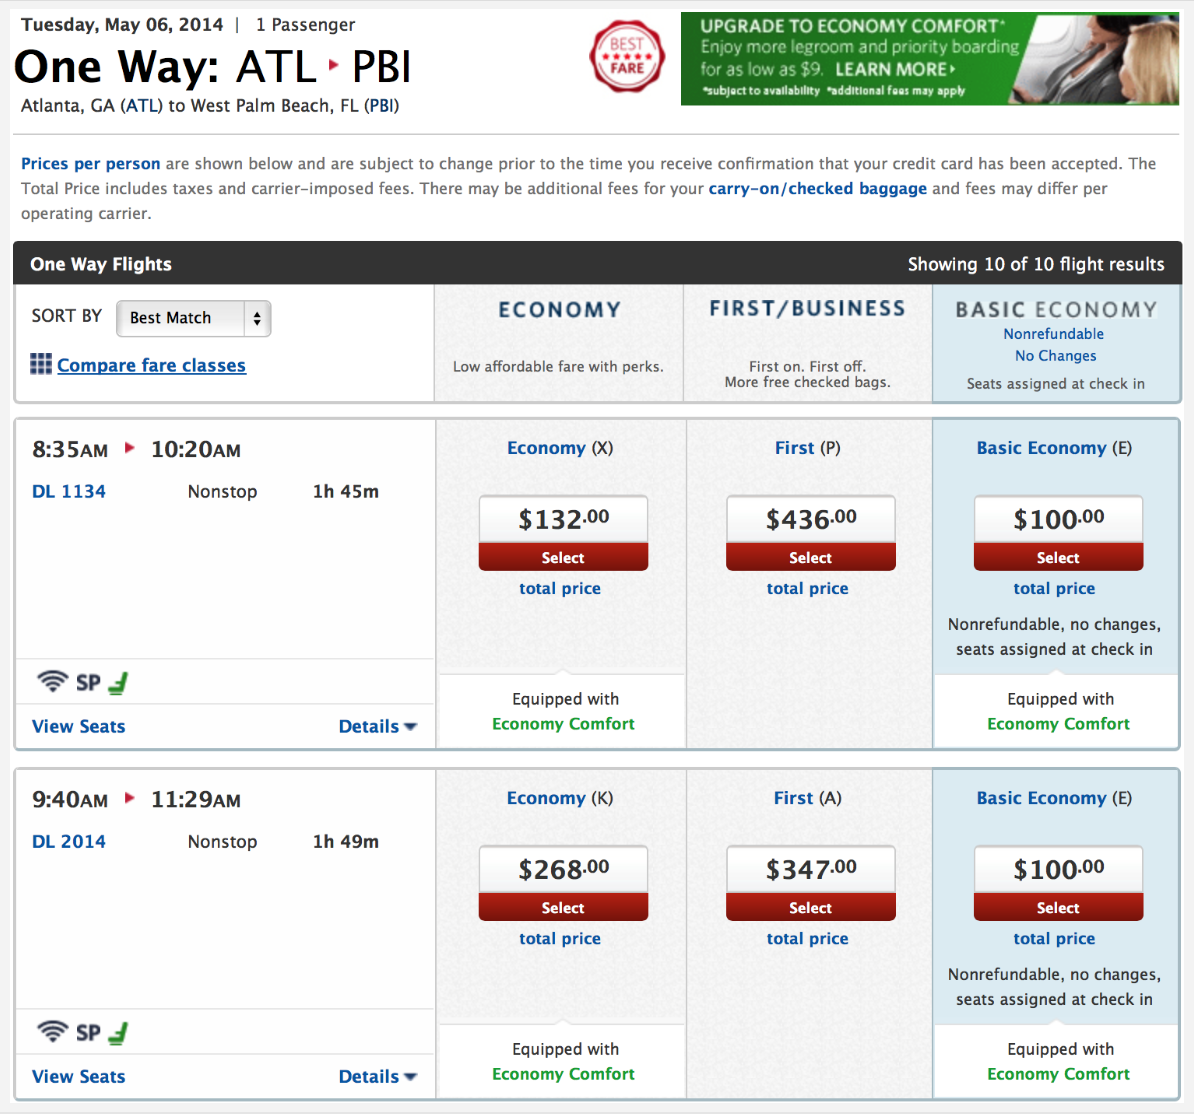 This screen shot of two flights operated by Delta Air Lines from Atlanta to West Palm Beach on Tuesday, May 6, 2014 shows a comparison between the lowest economy class fare, the first class fare, and the Basic Economy fare.